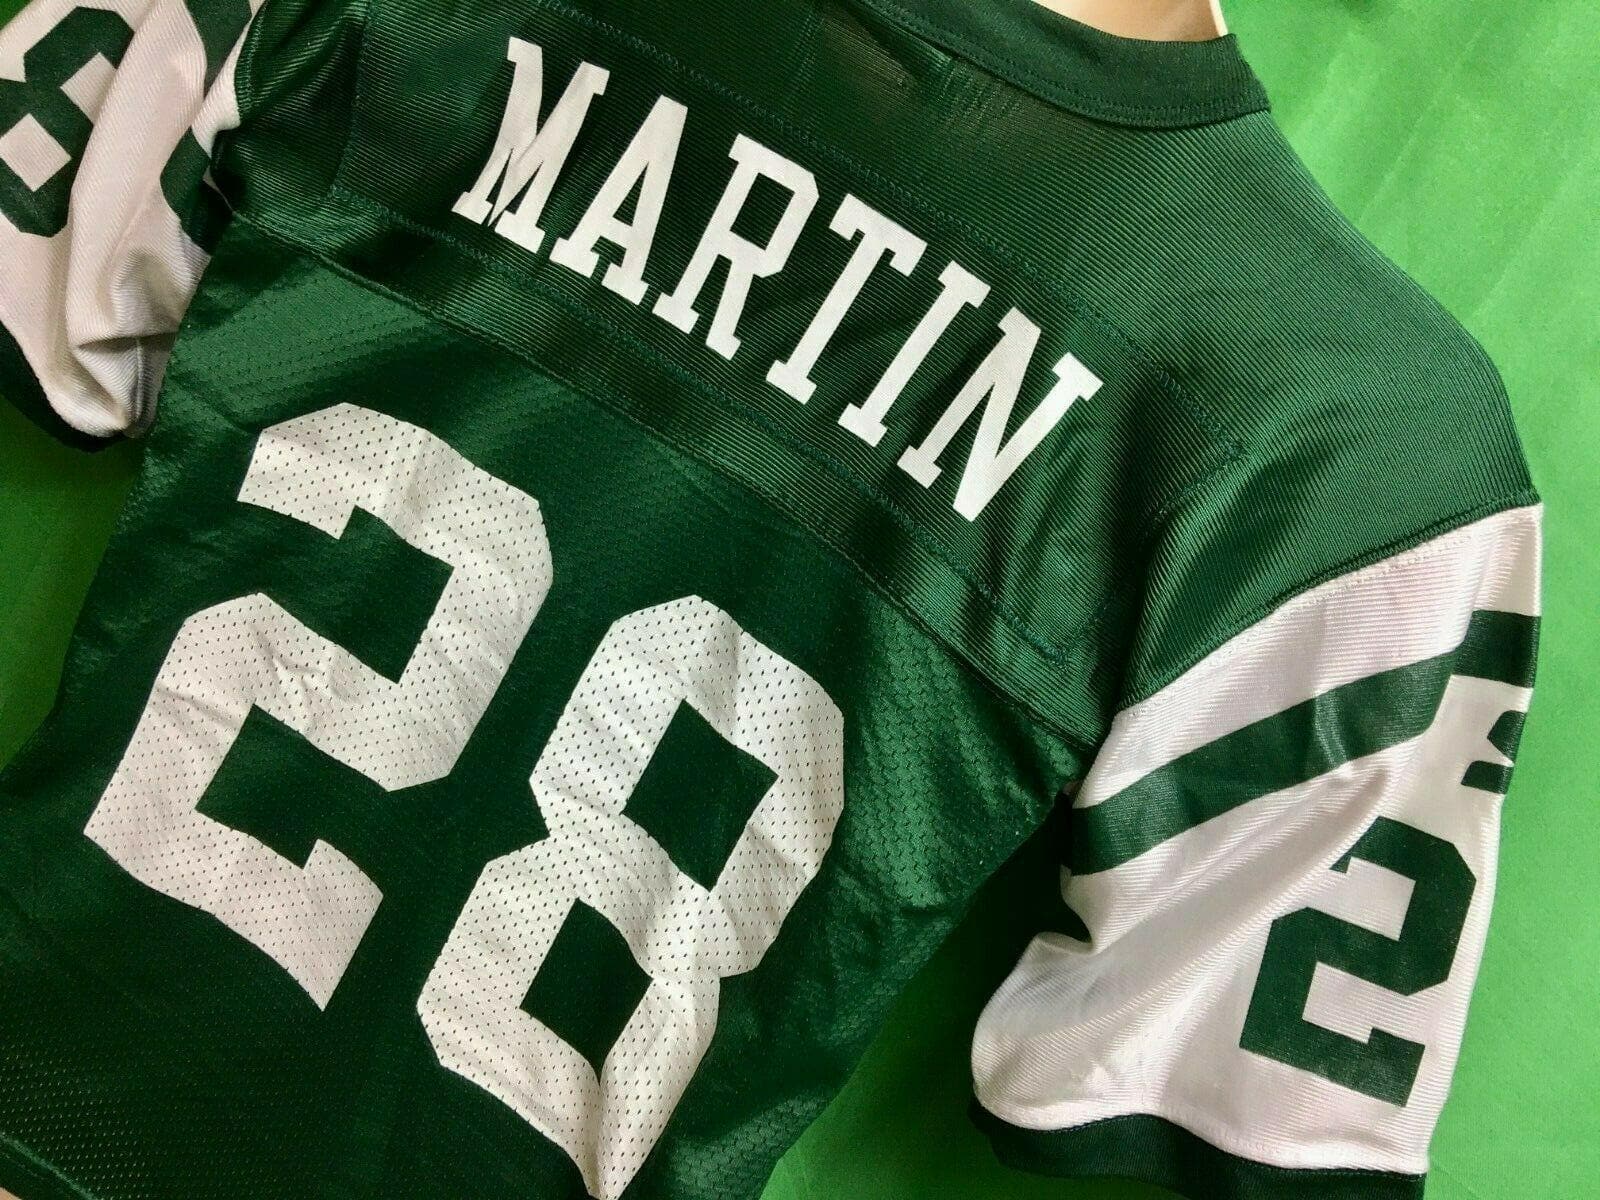 NFL New York Jets Curtis Martin #28 Vintage Starter Jersey Youth Small 8